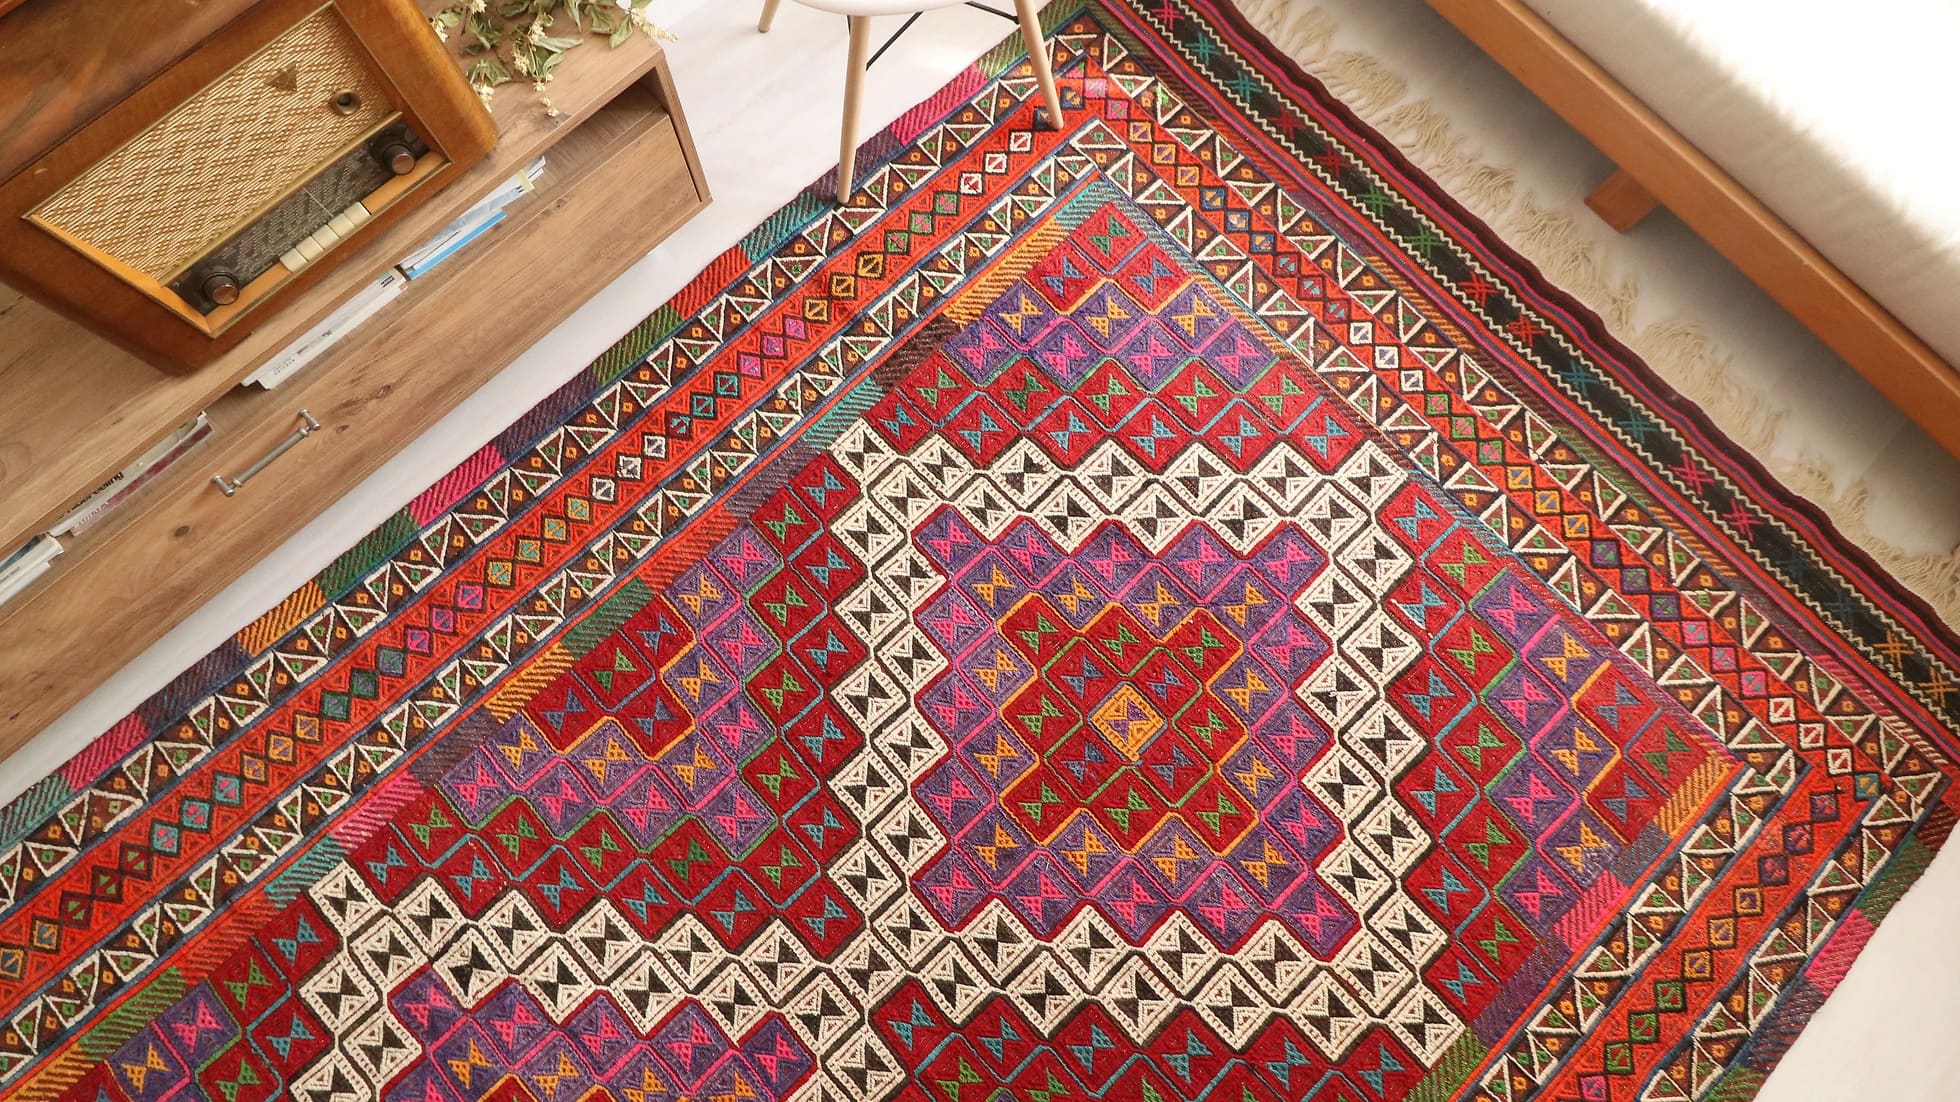 Vintage Cecim Kilim Rug in vibrant colors such as red, purple and pink